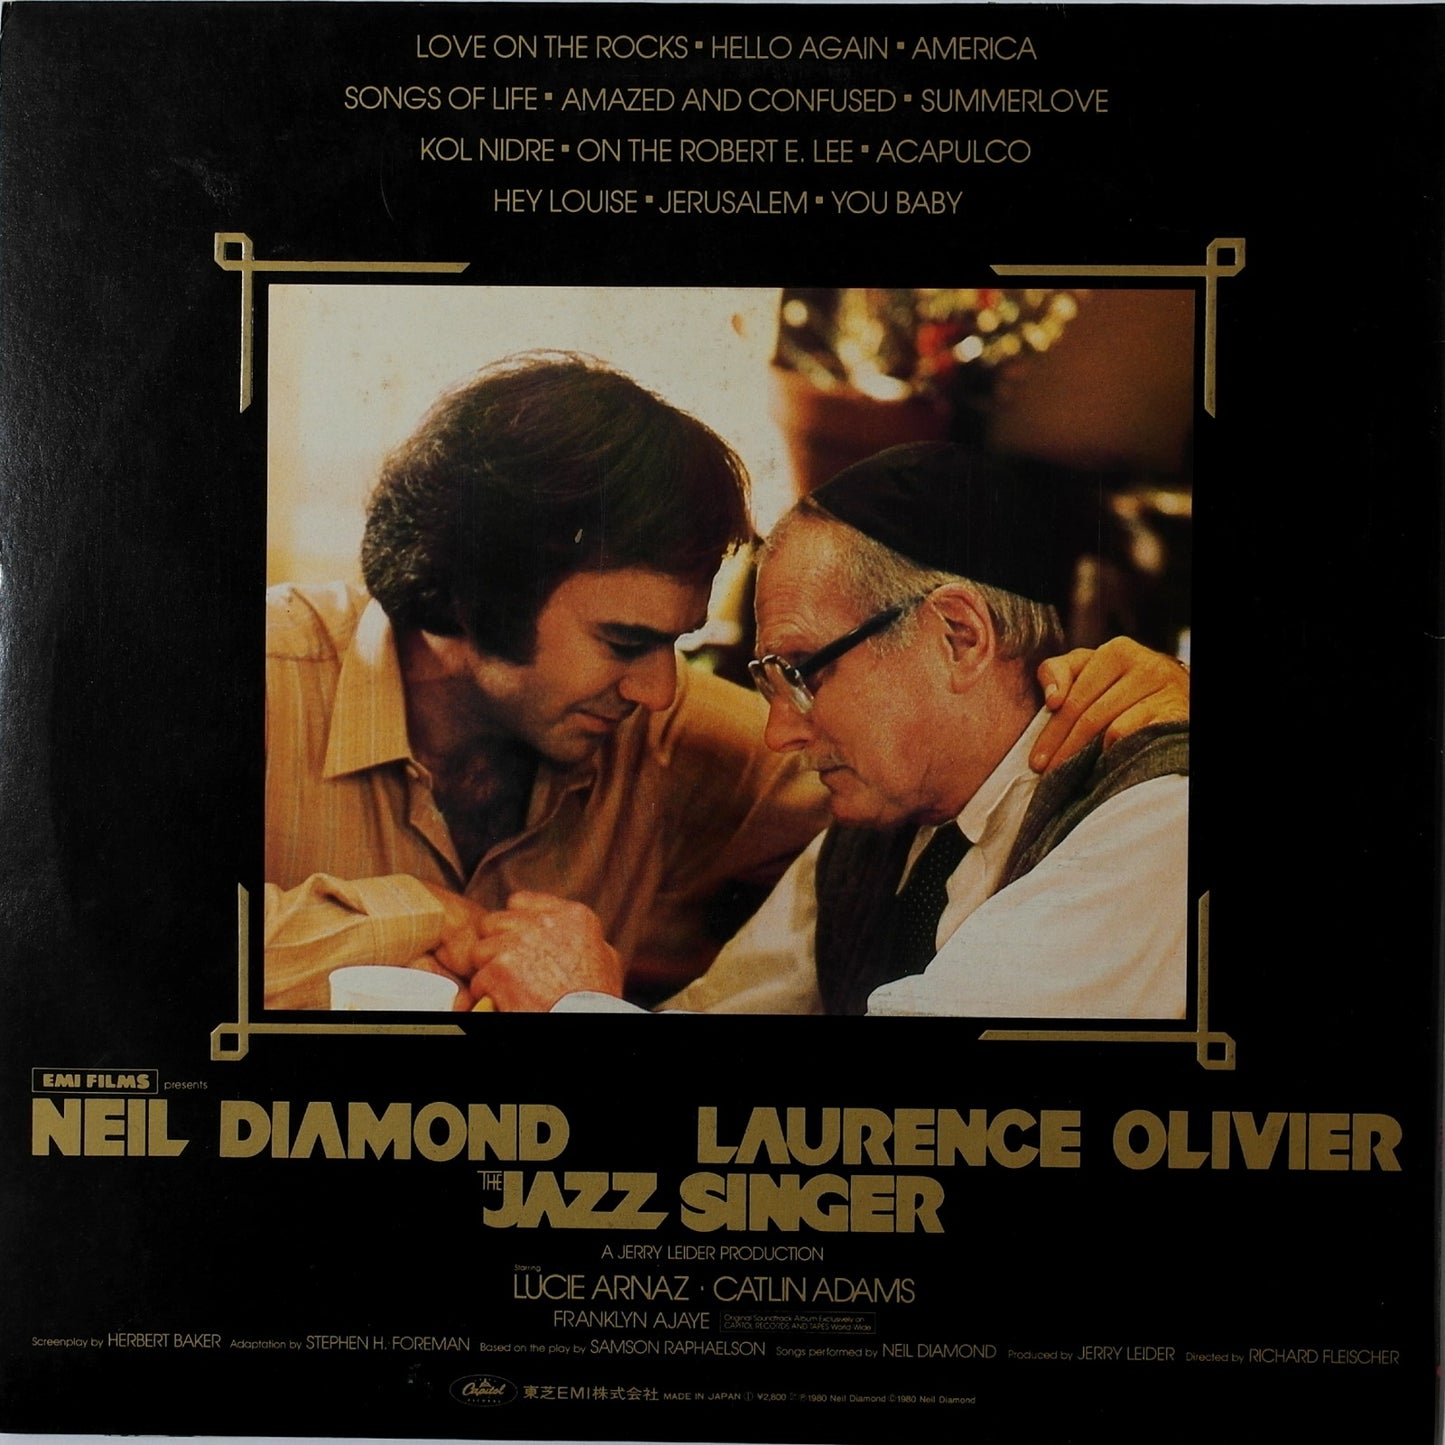 NEIL DIAMOND - The Jazz Singer (Original Songs From The Motion Picture)